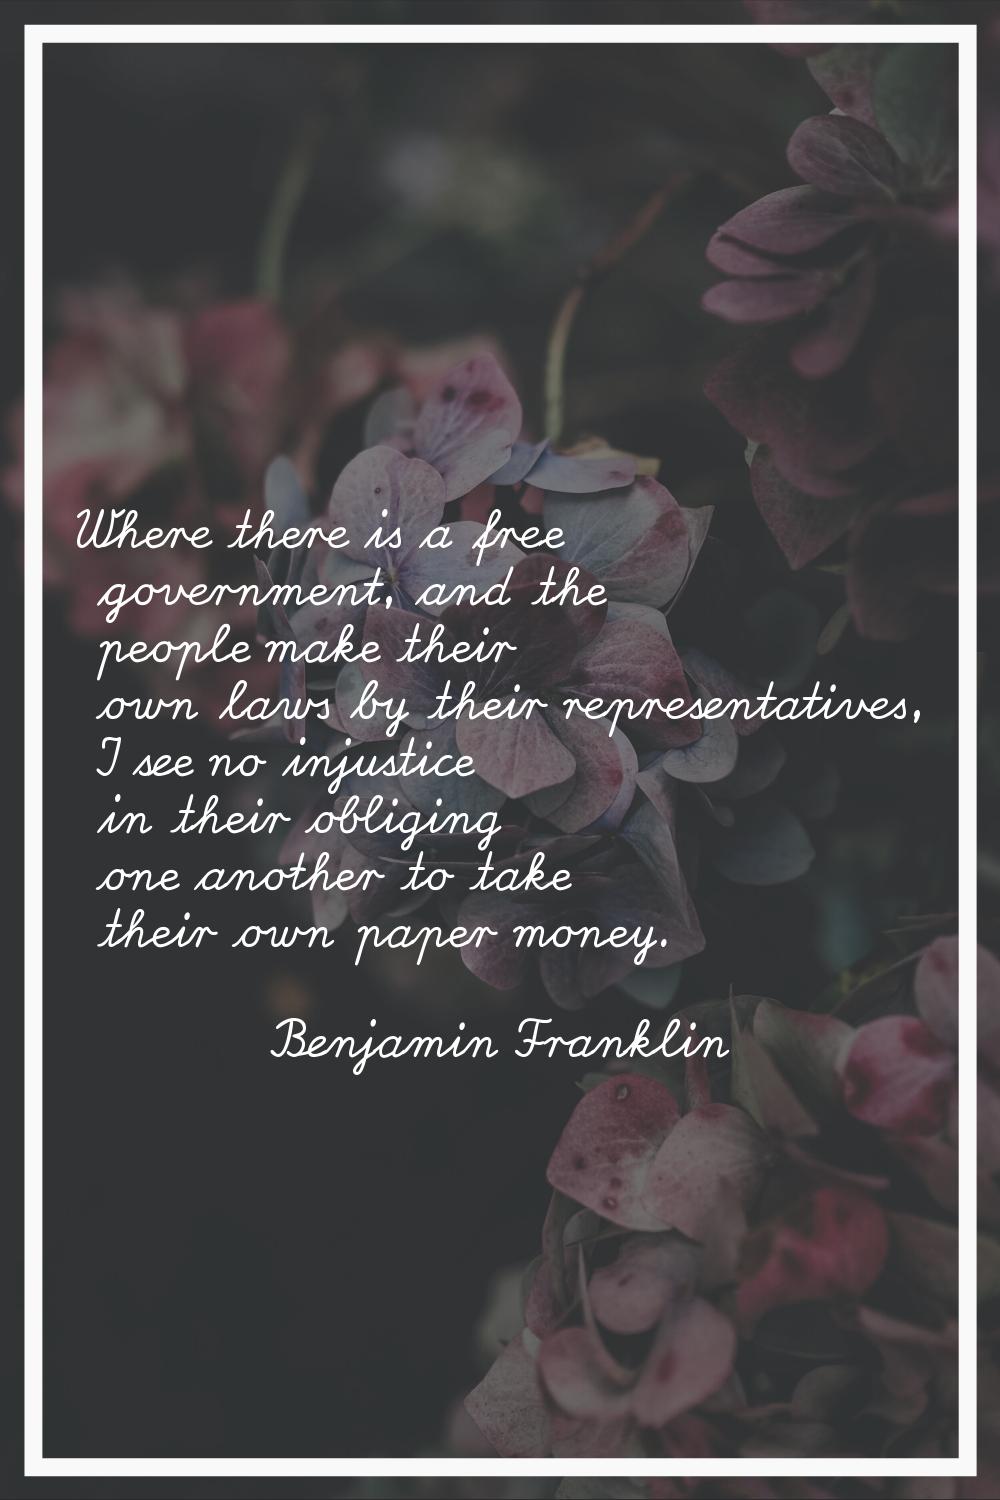 Where there is a free government, and the people make their own laws by their representatives, I se